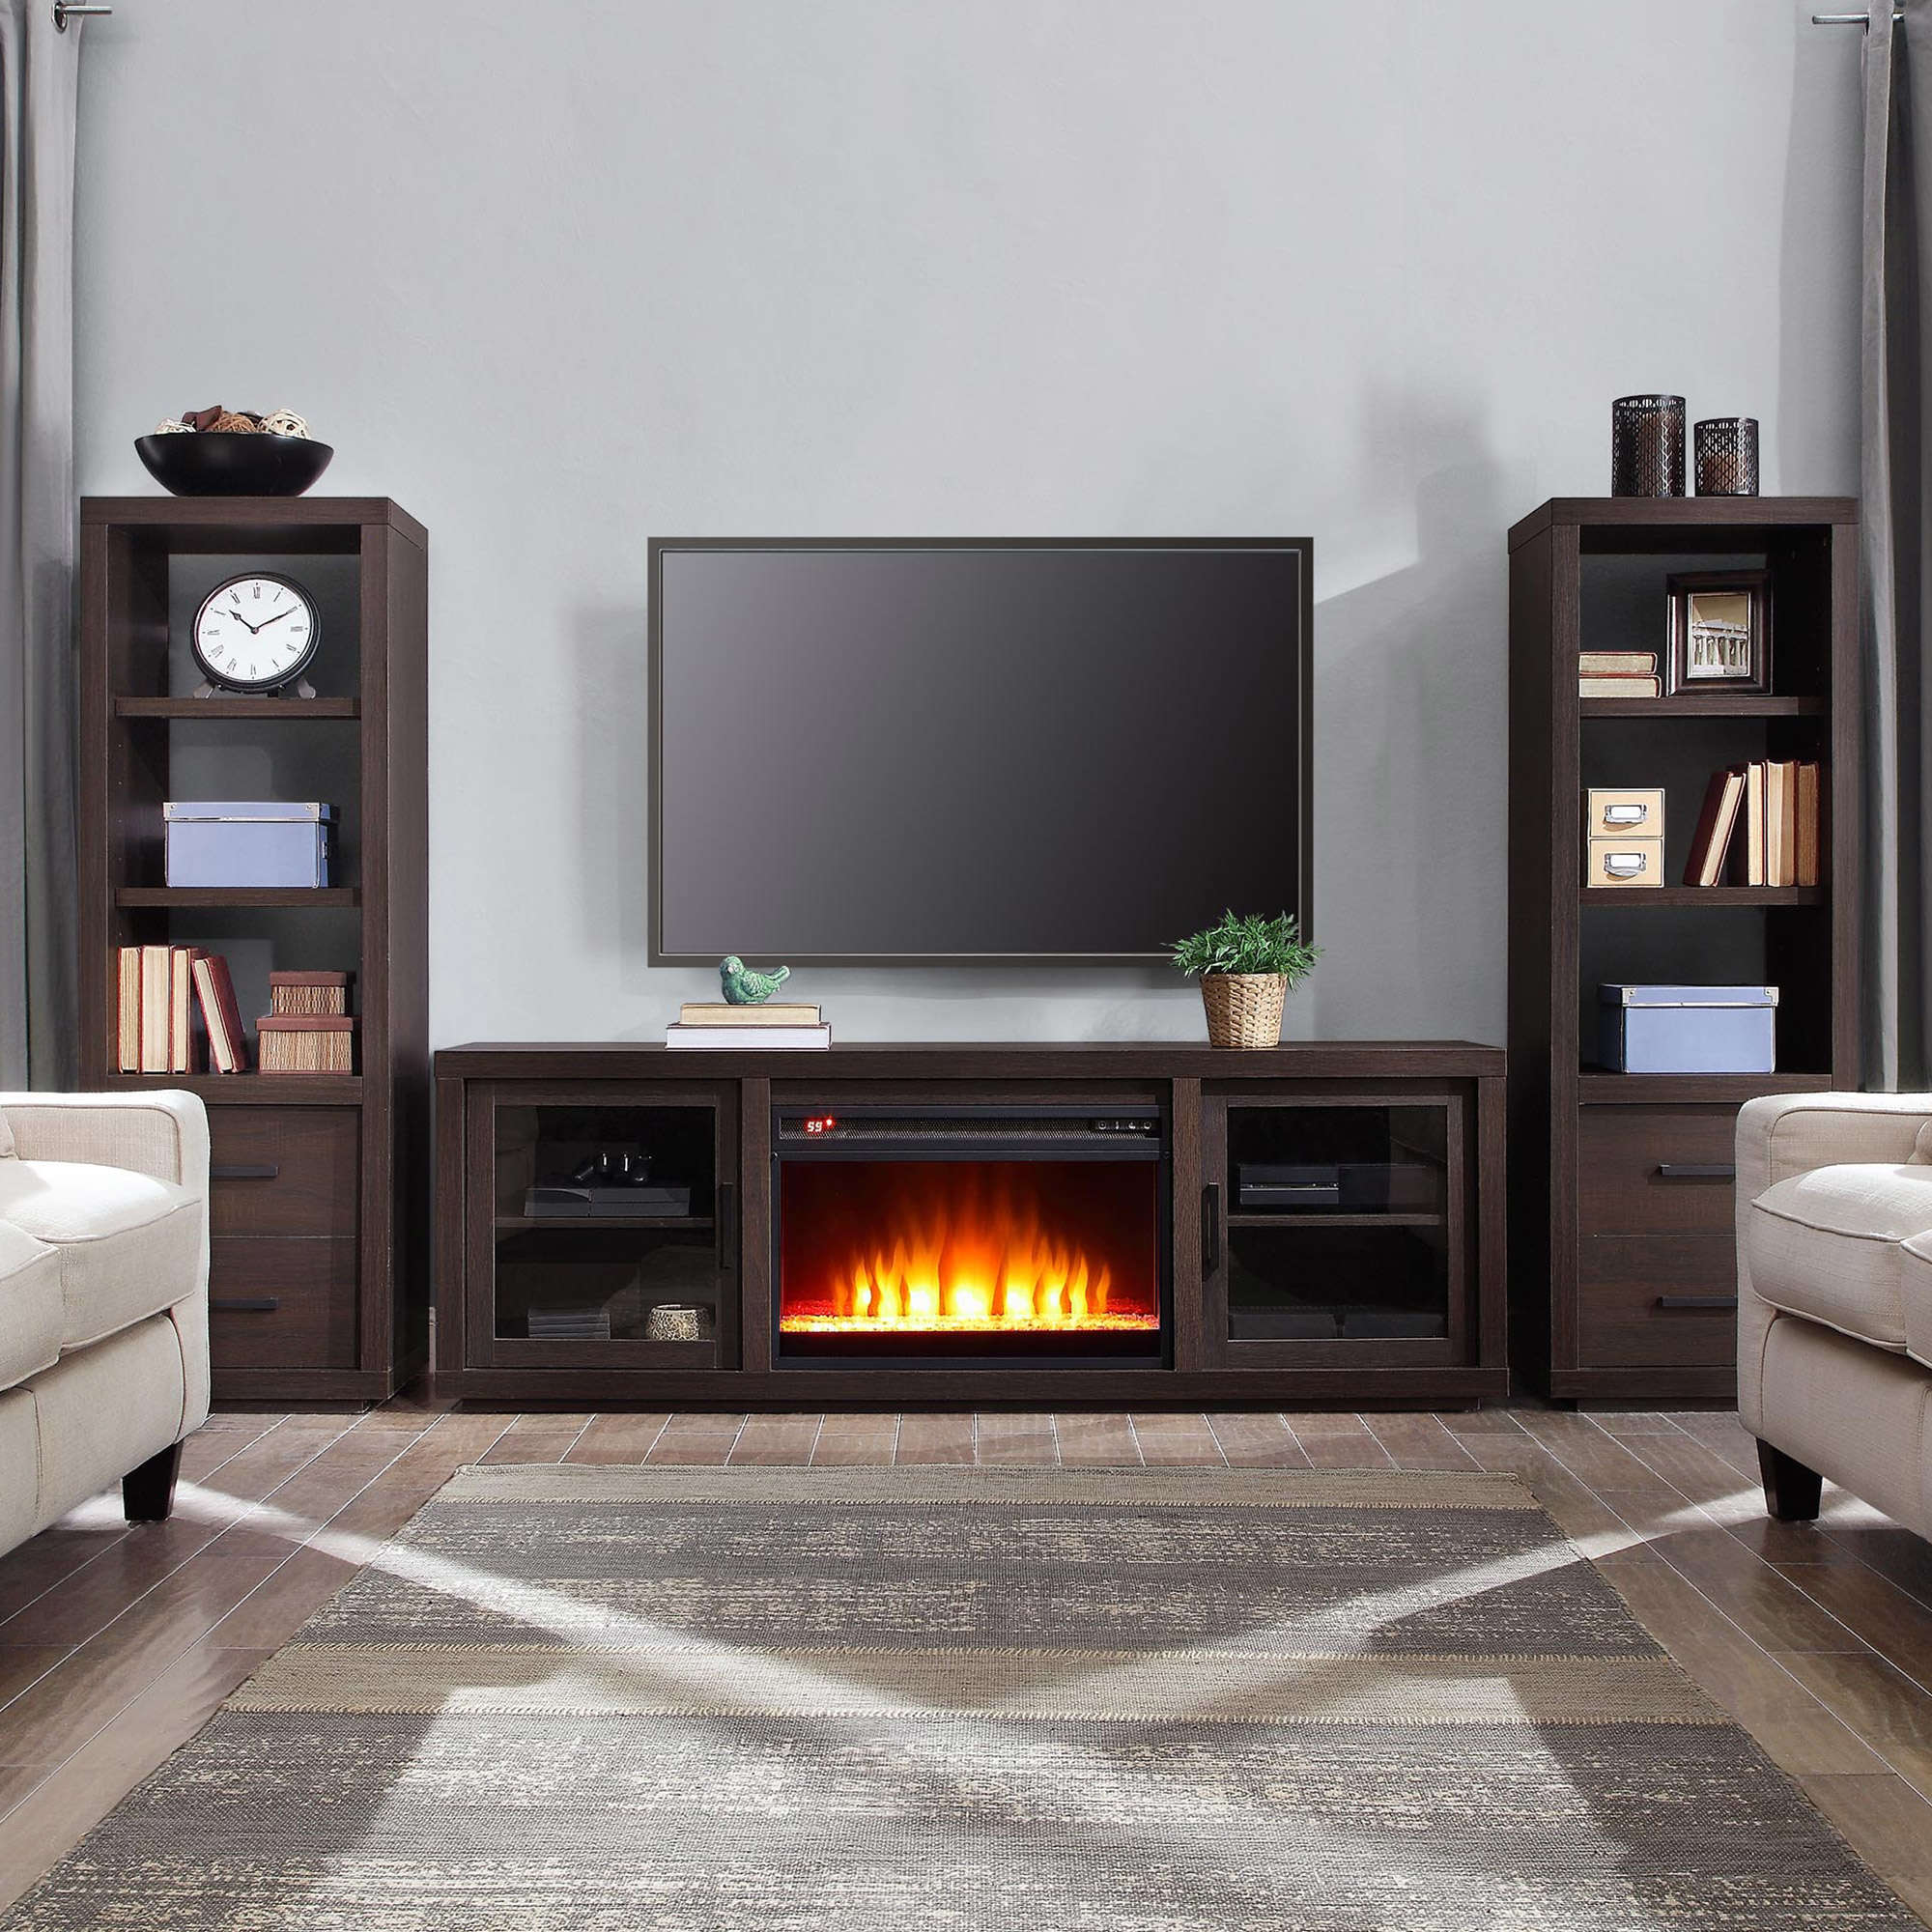 Better Homes & Gardens Steele Media Fireplace Console Television Stand for TVs up to 80" Espresso Finish - image 4 of 9